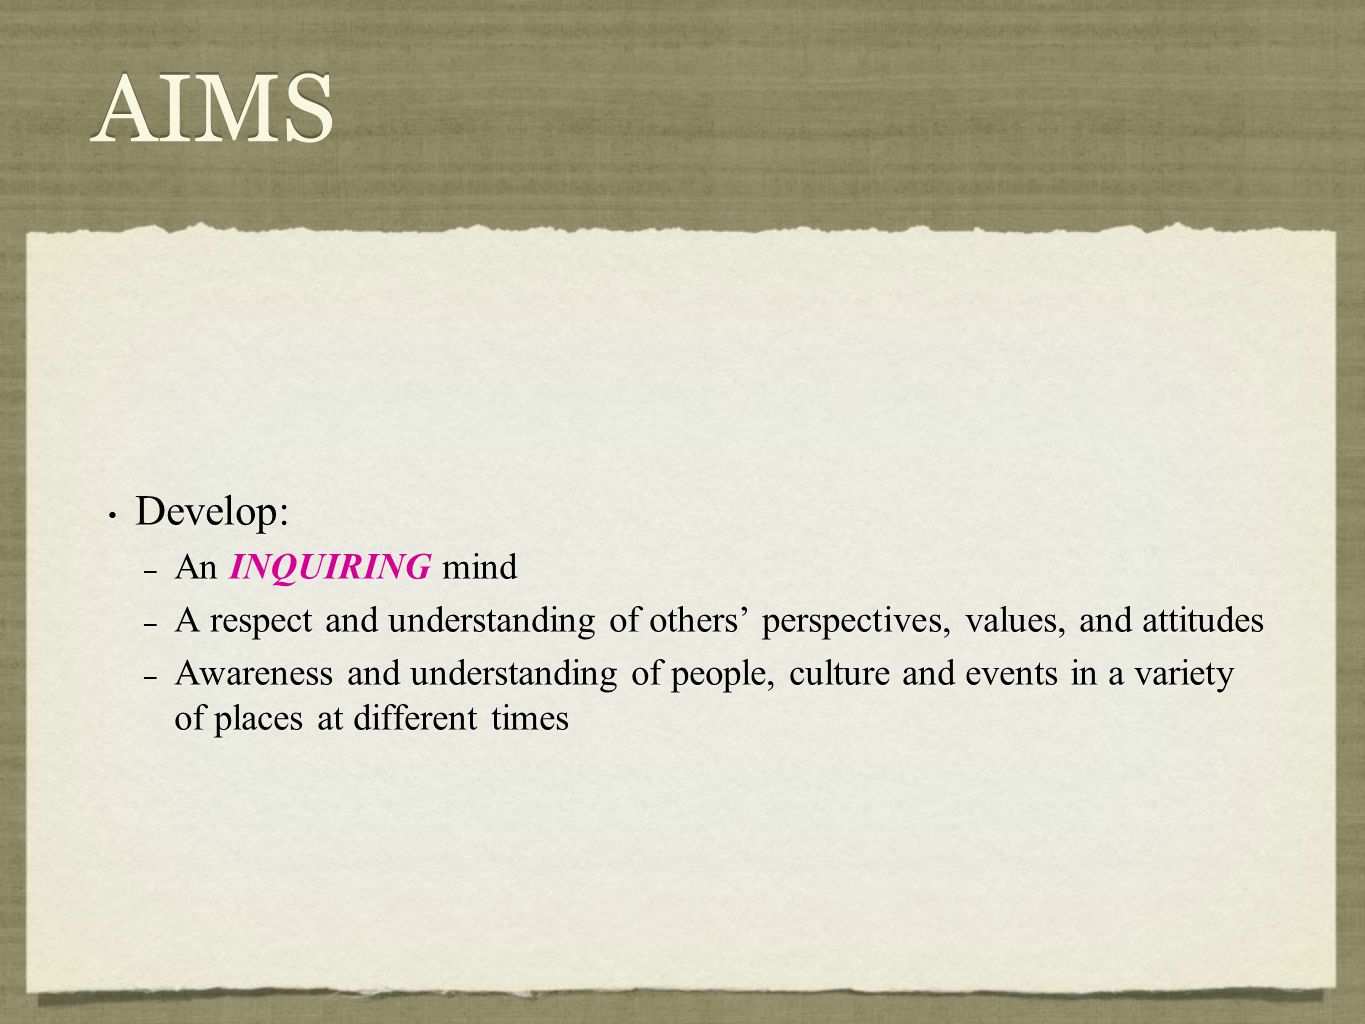 AIMS Develop: – An INQUIRING mind – A respect and understanding of others’ perspectives, values, and attitudes – Awareness and understanding of people, culture and events in a variety of places at different times Develop: – An INQUIRING mind – A respect and understanding of others’ perspectives, values, and attitudes – Awareness and understanding of people, culture and events in a variety of places at different times